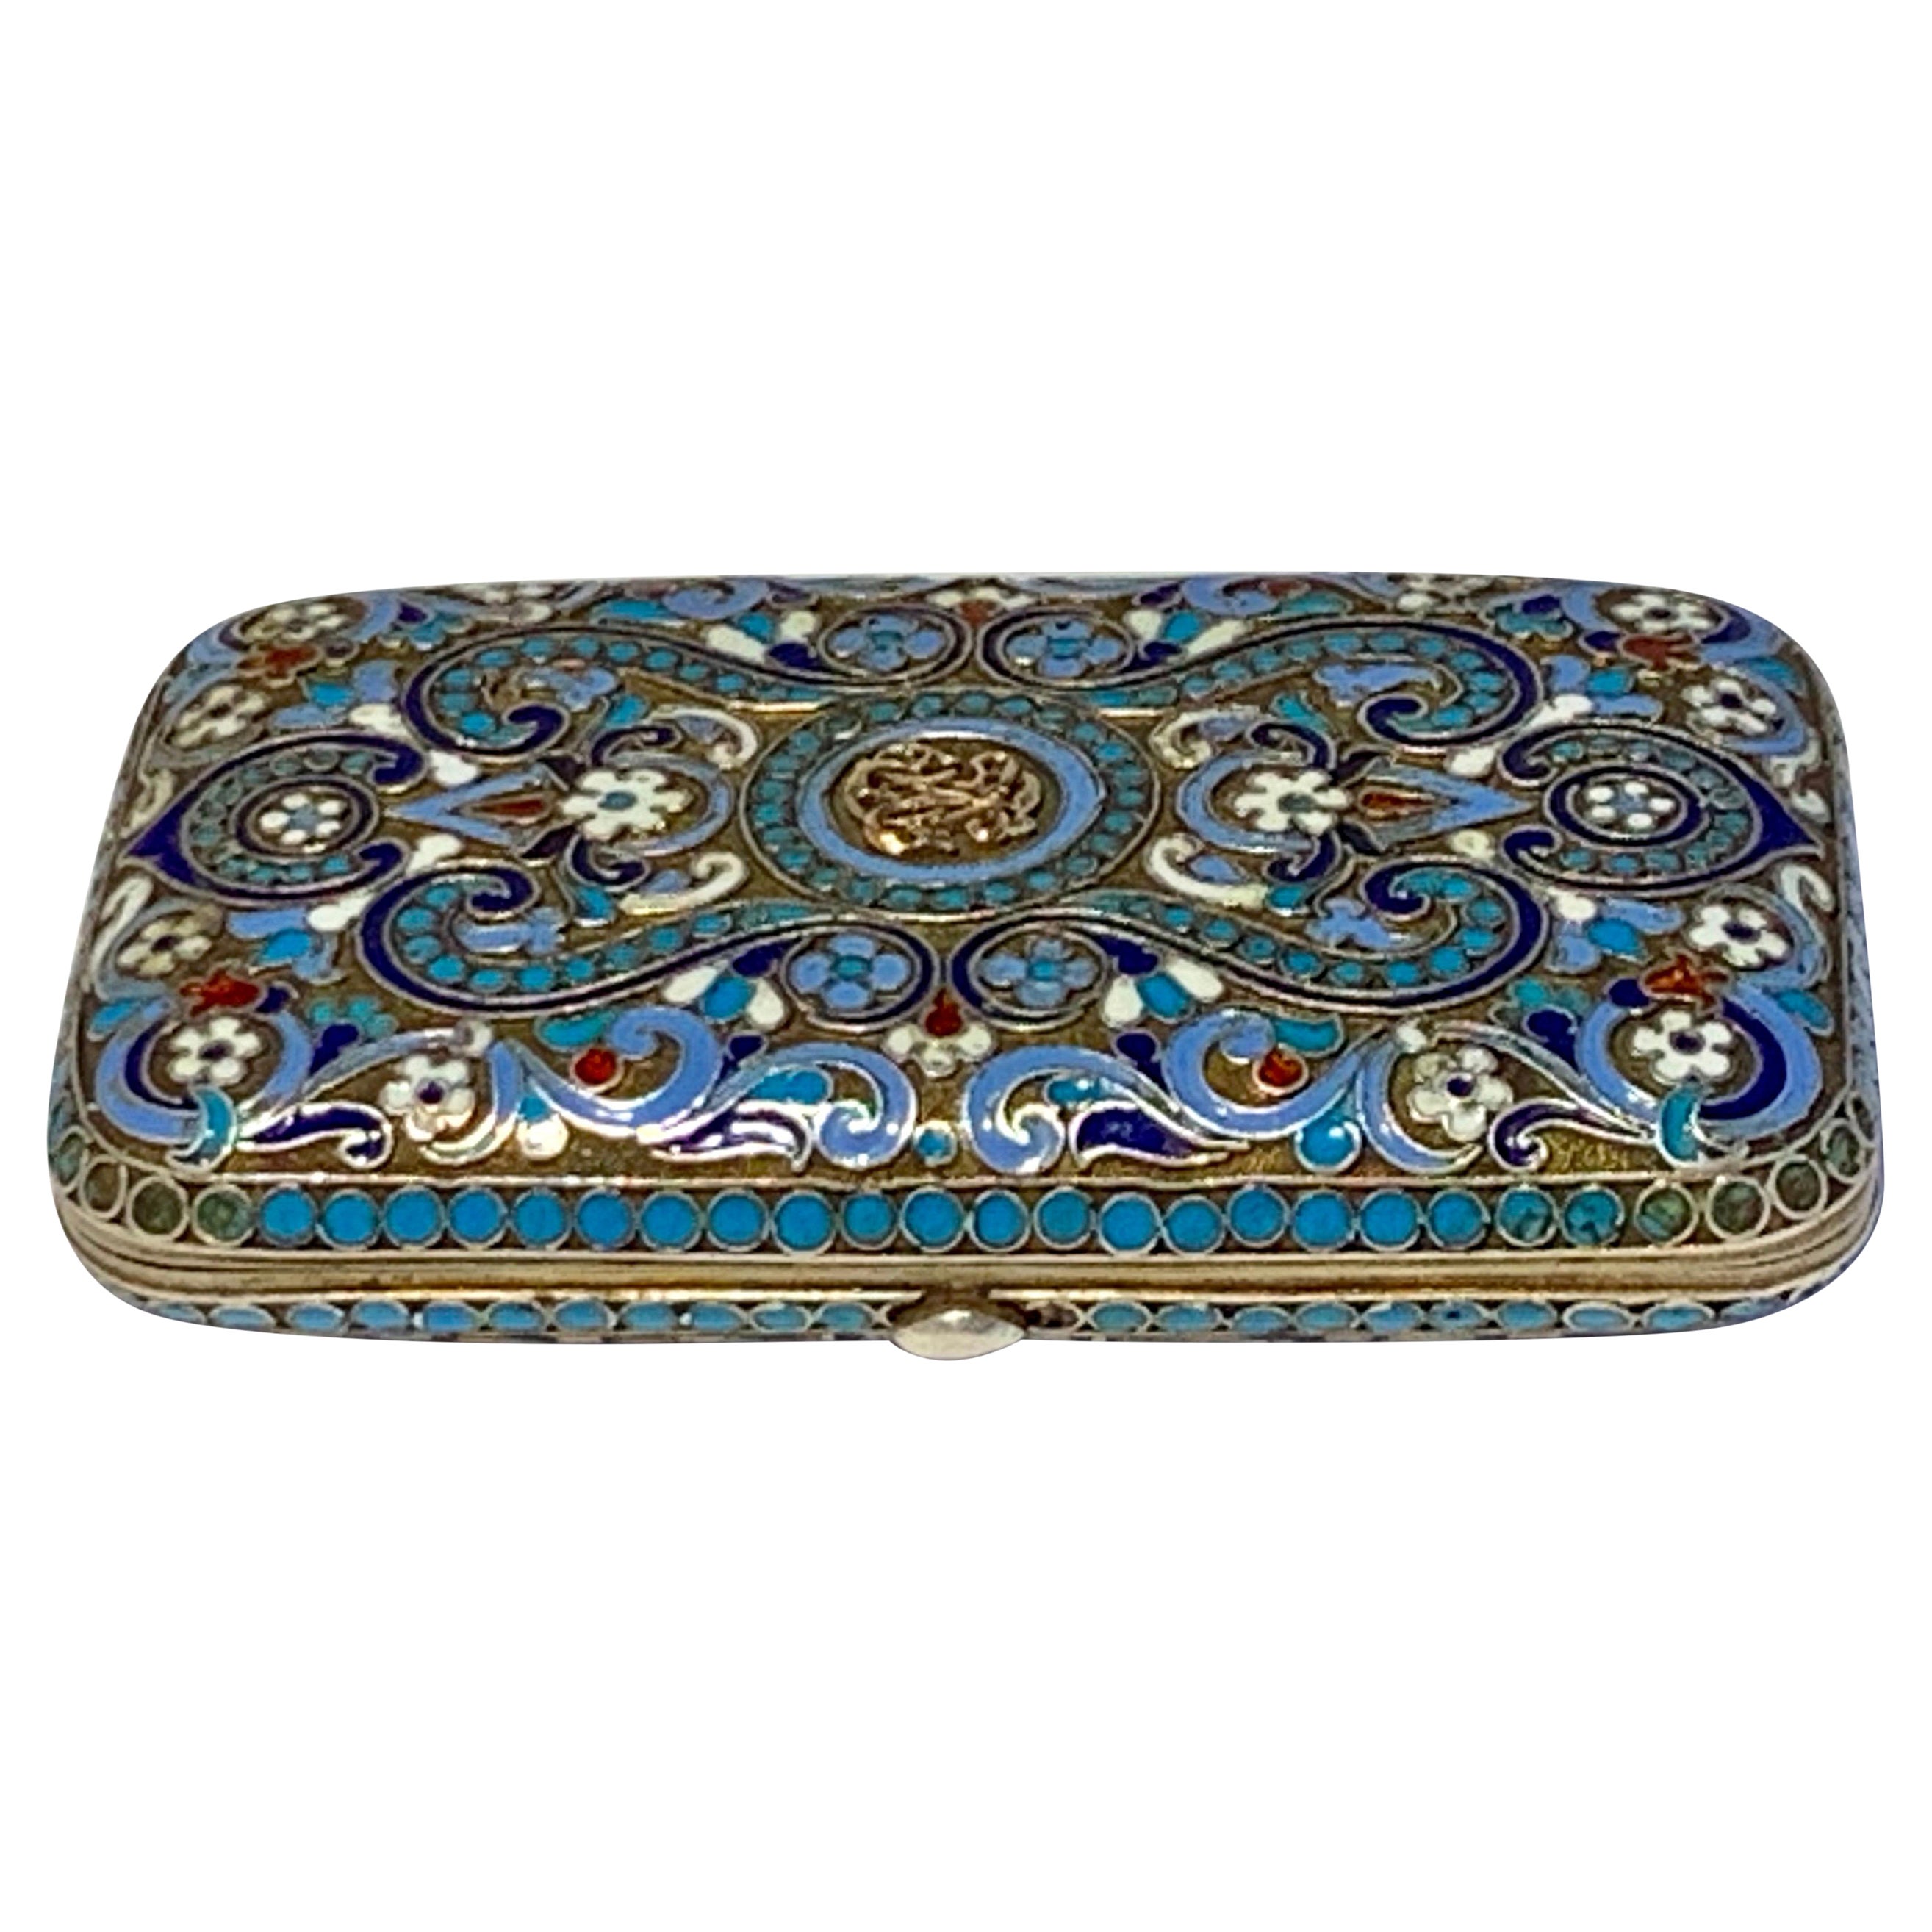 Russian Silver-Gilt and Cloisonne Enamel Box